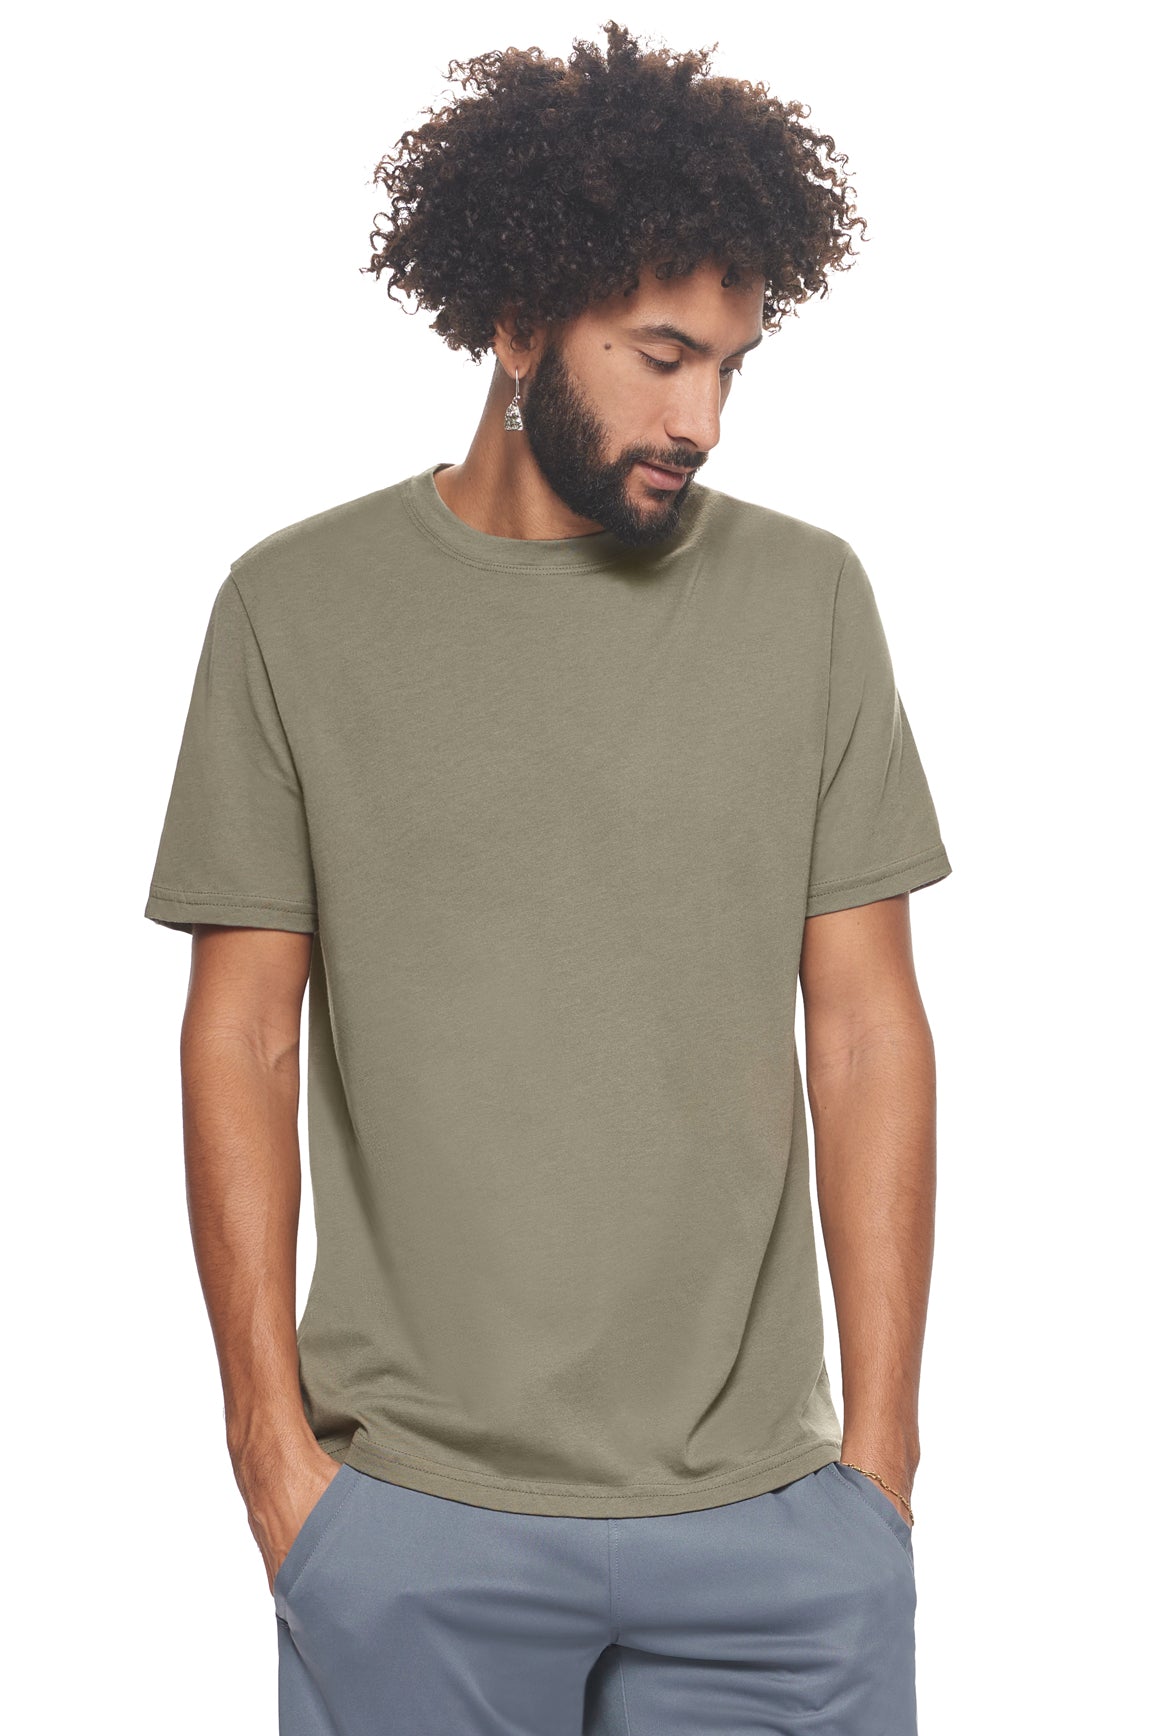 Expert Brand Retail Sustainable Eco-Friendly Micromodal Cotton Men's Crewneck T-Shirt Made in USA olive#color_olive